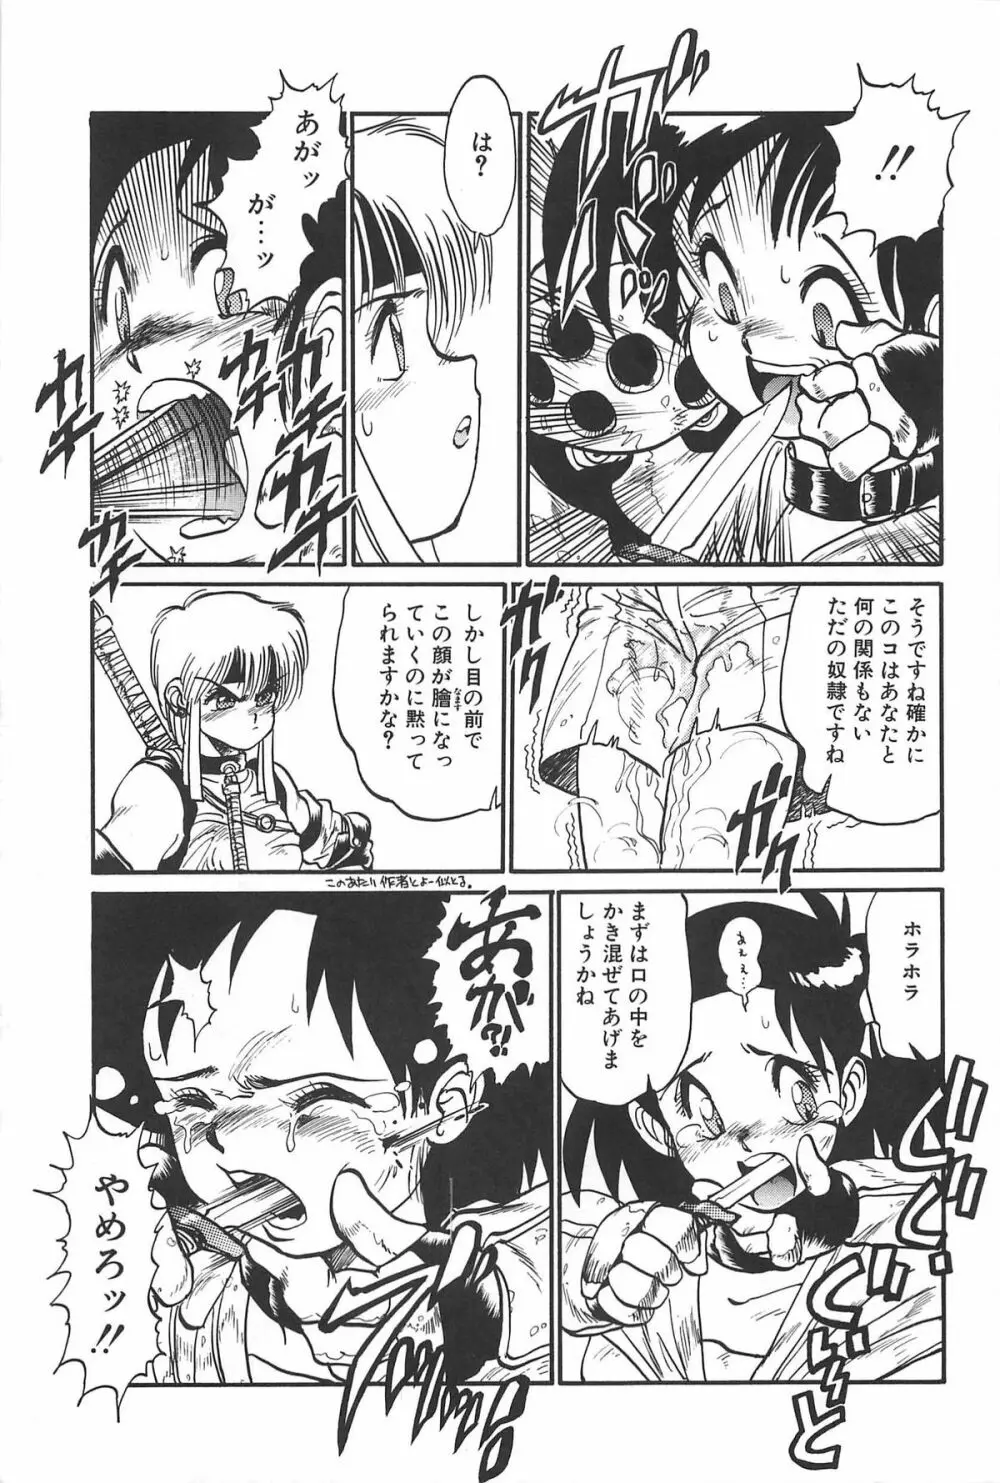 LOVE ME 1995 Page.51